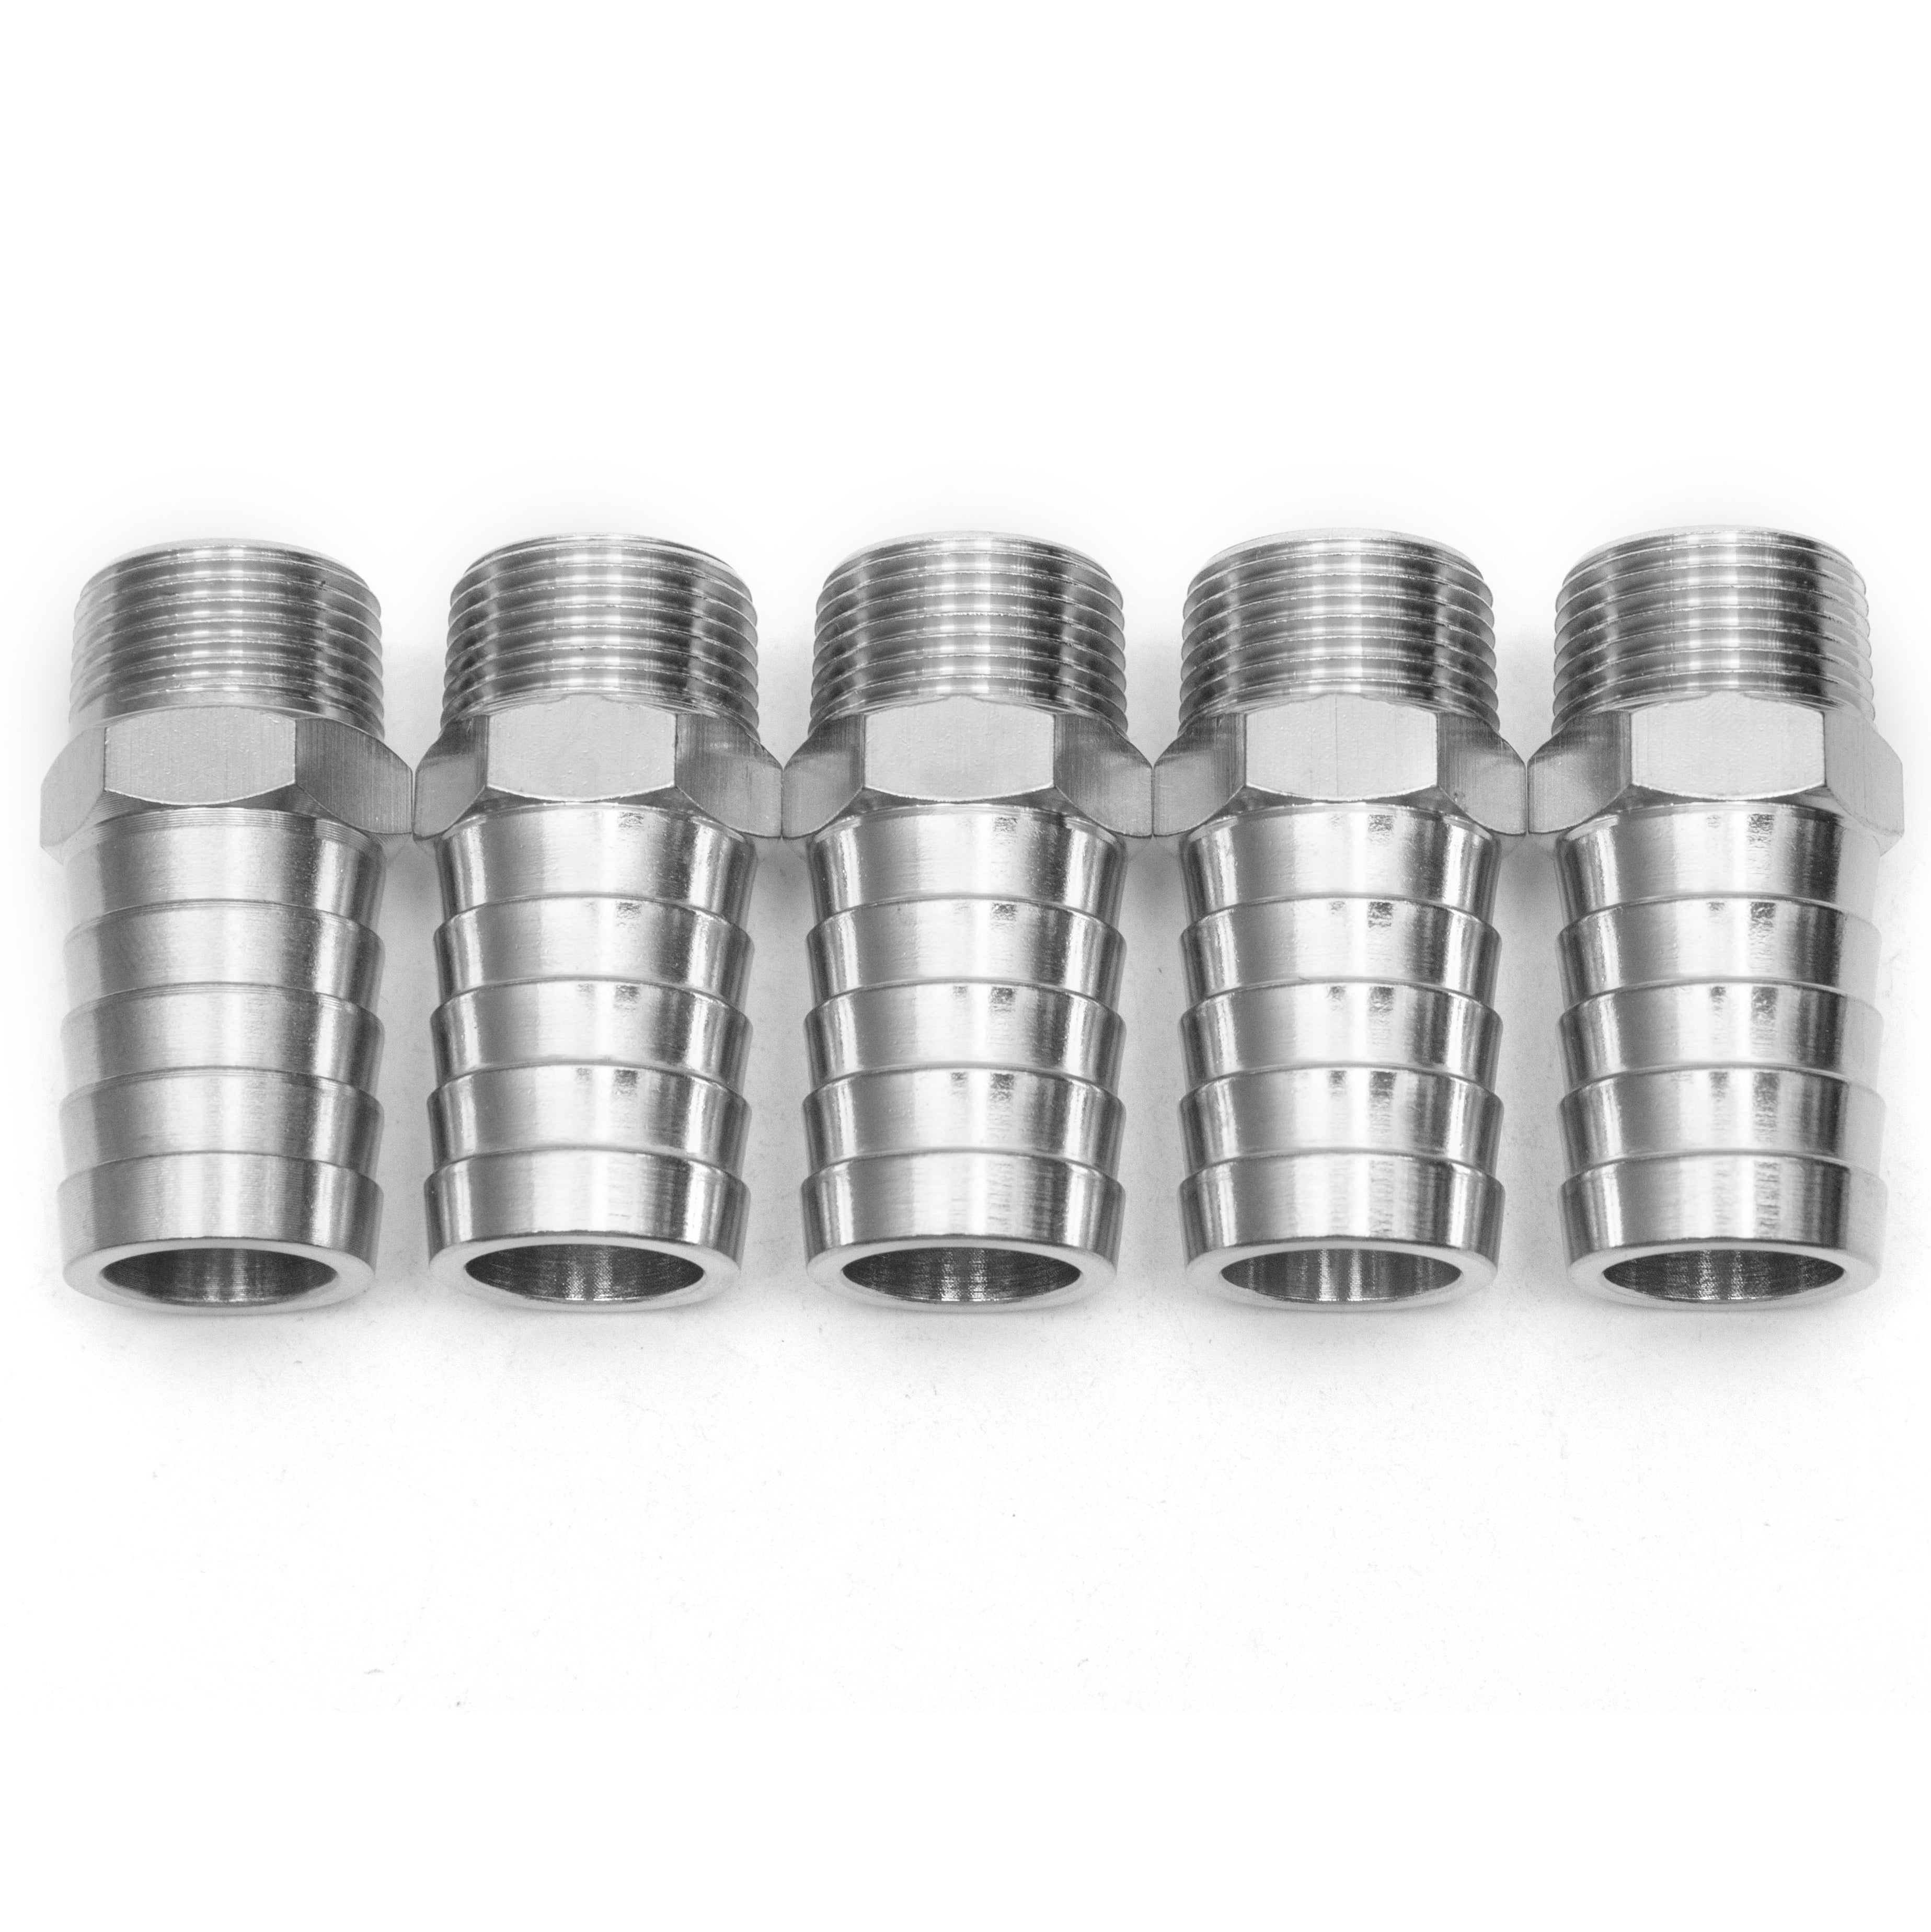 LTWFITTING Bar Production Stainless Steel 316 Barb Fitting Coupler/Connector 1 Inch Hose ID x 3/4 Inch Male NPT Air Fuel Water (Pack of 5)